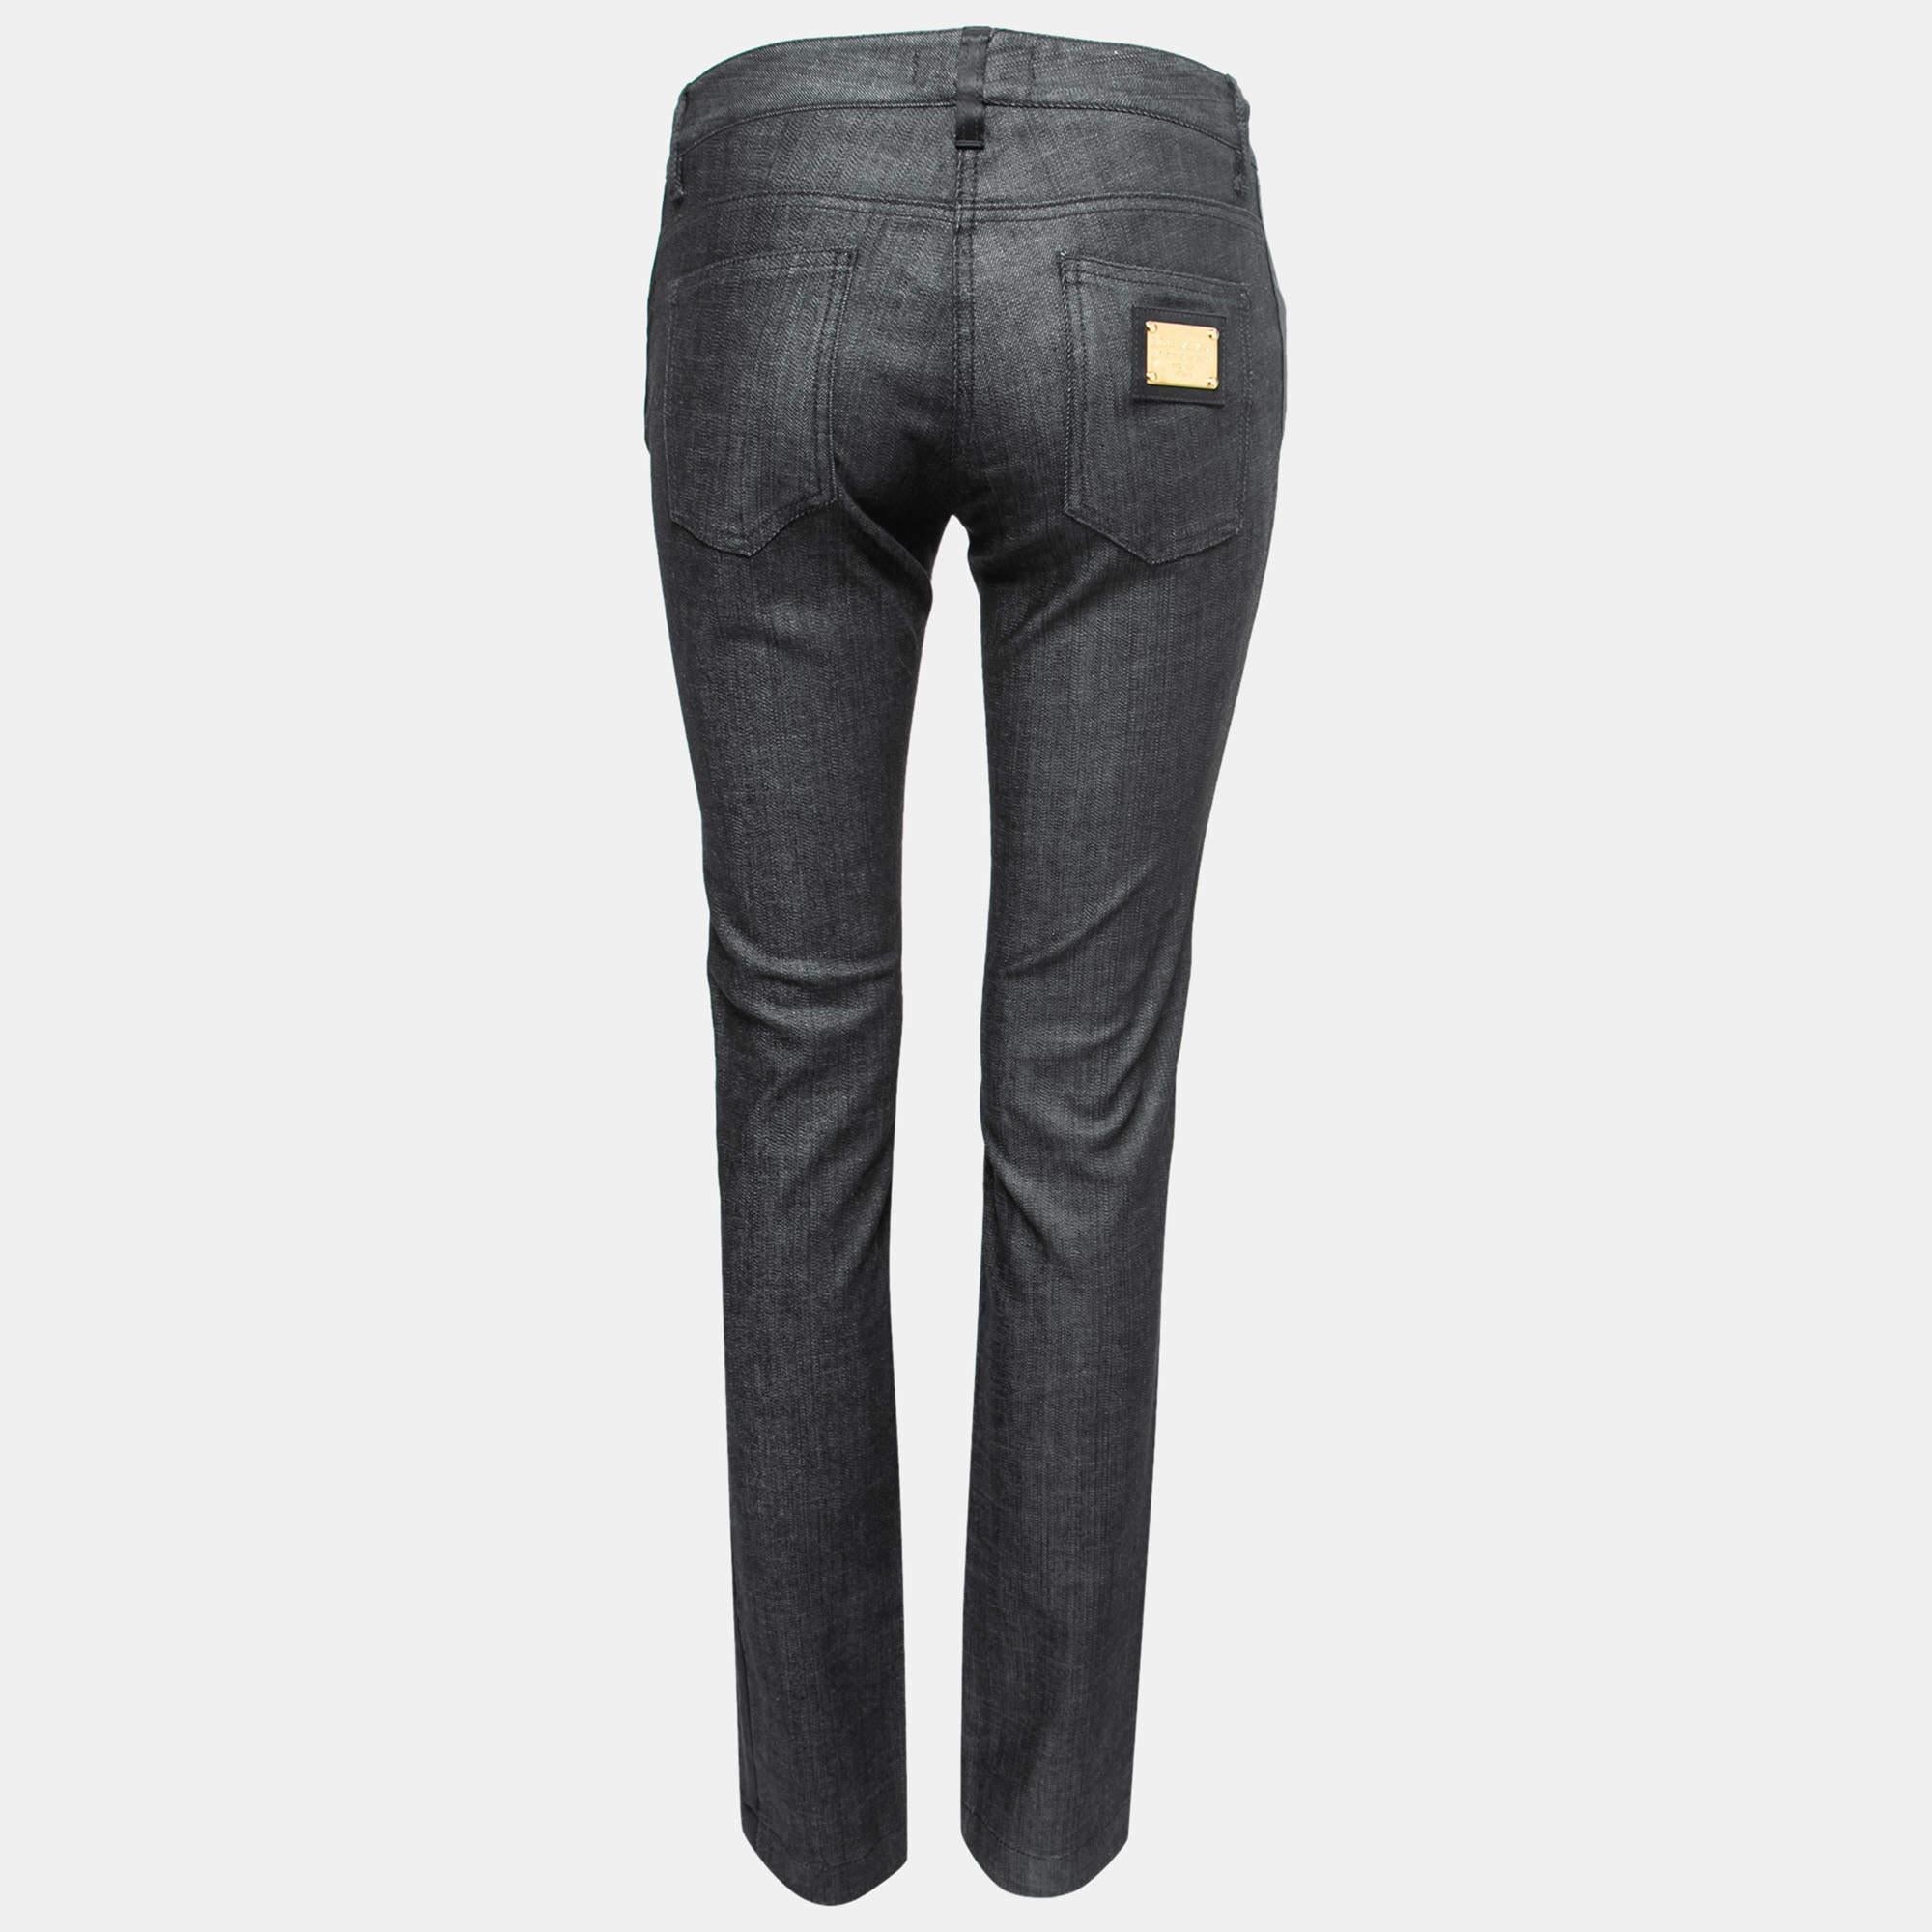 A good pair of jeans always makes the closet complete. This pair of jeans from Dolce & Gabbana is tailored with such skill and panache that it will be your favorite in no time. It is tailored using quality fabric and gives you a comfortably stylish